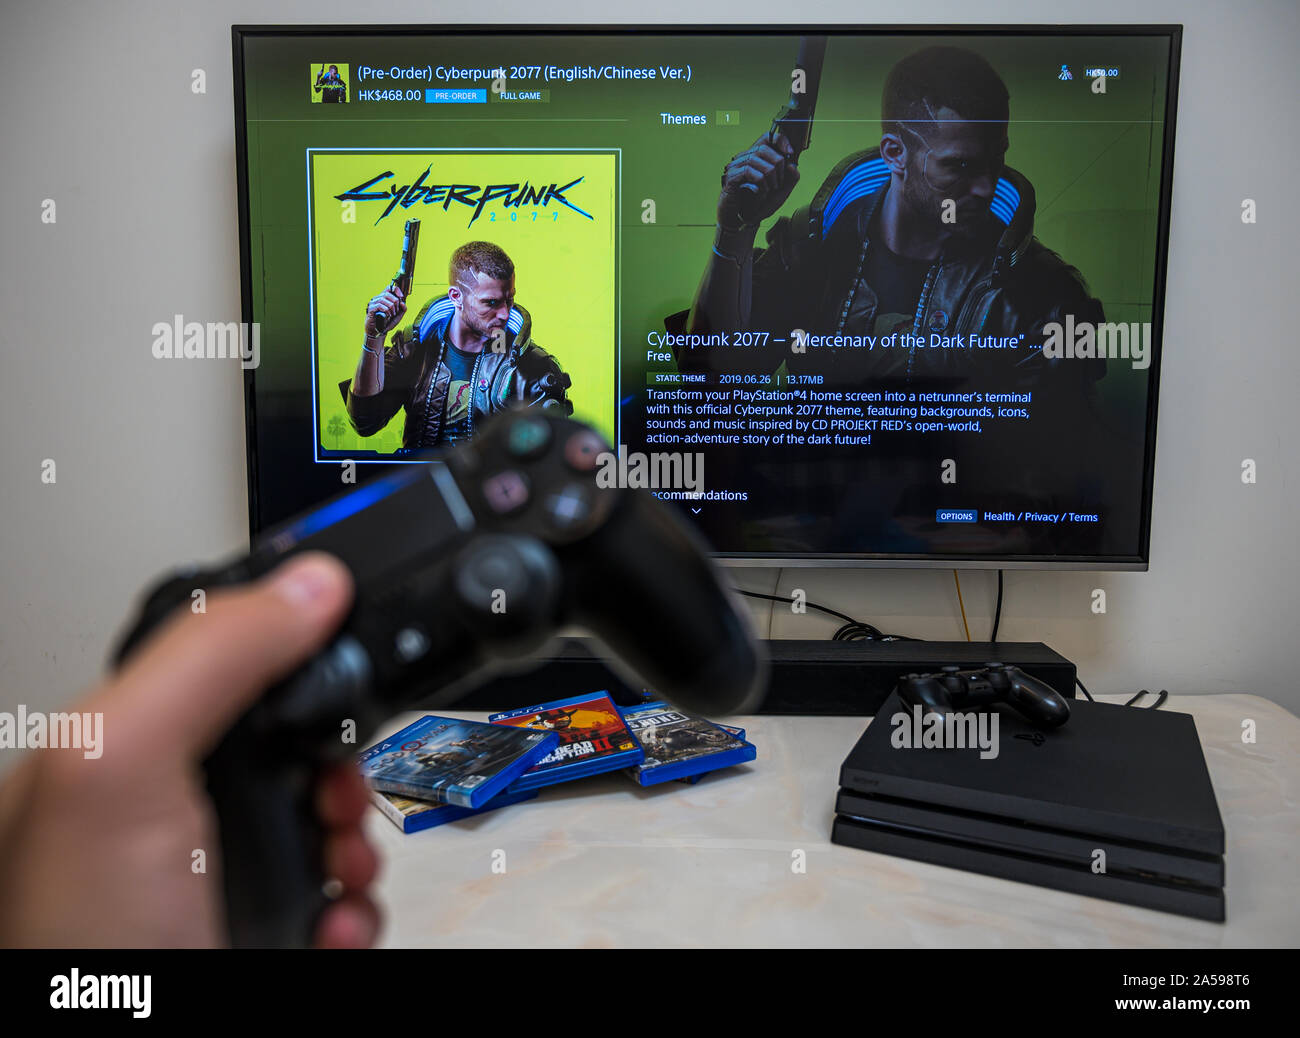 Pre-order, download, play Sony Play Station 4 Pro game Cyberpunk 2077 on  the big LCD screen at home. Controller in the hand Stock Photo - Alamy